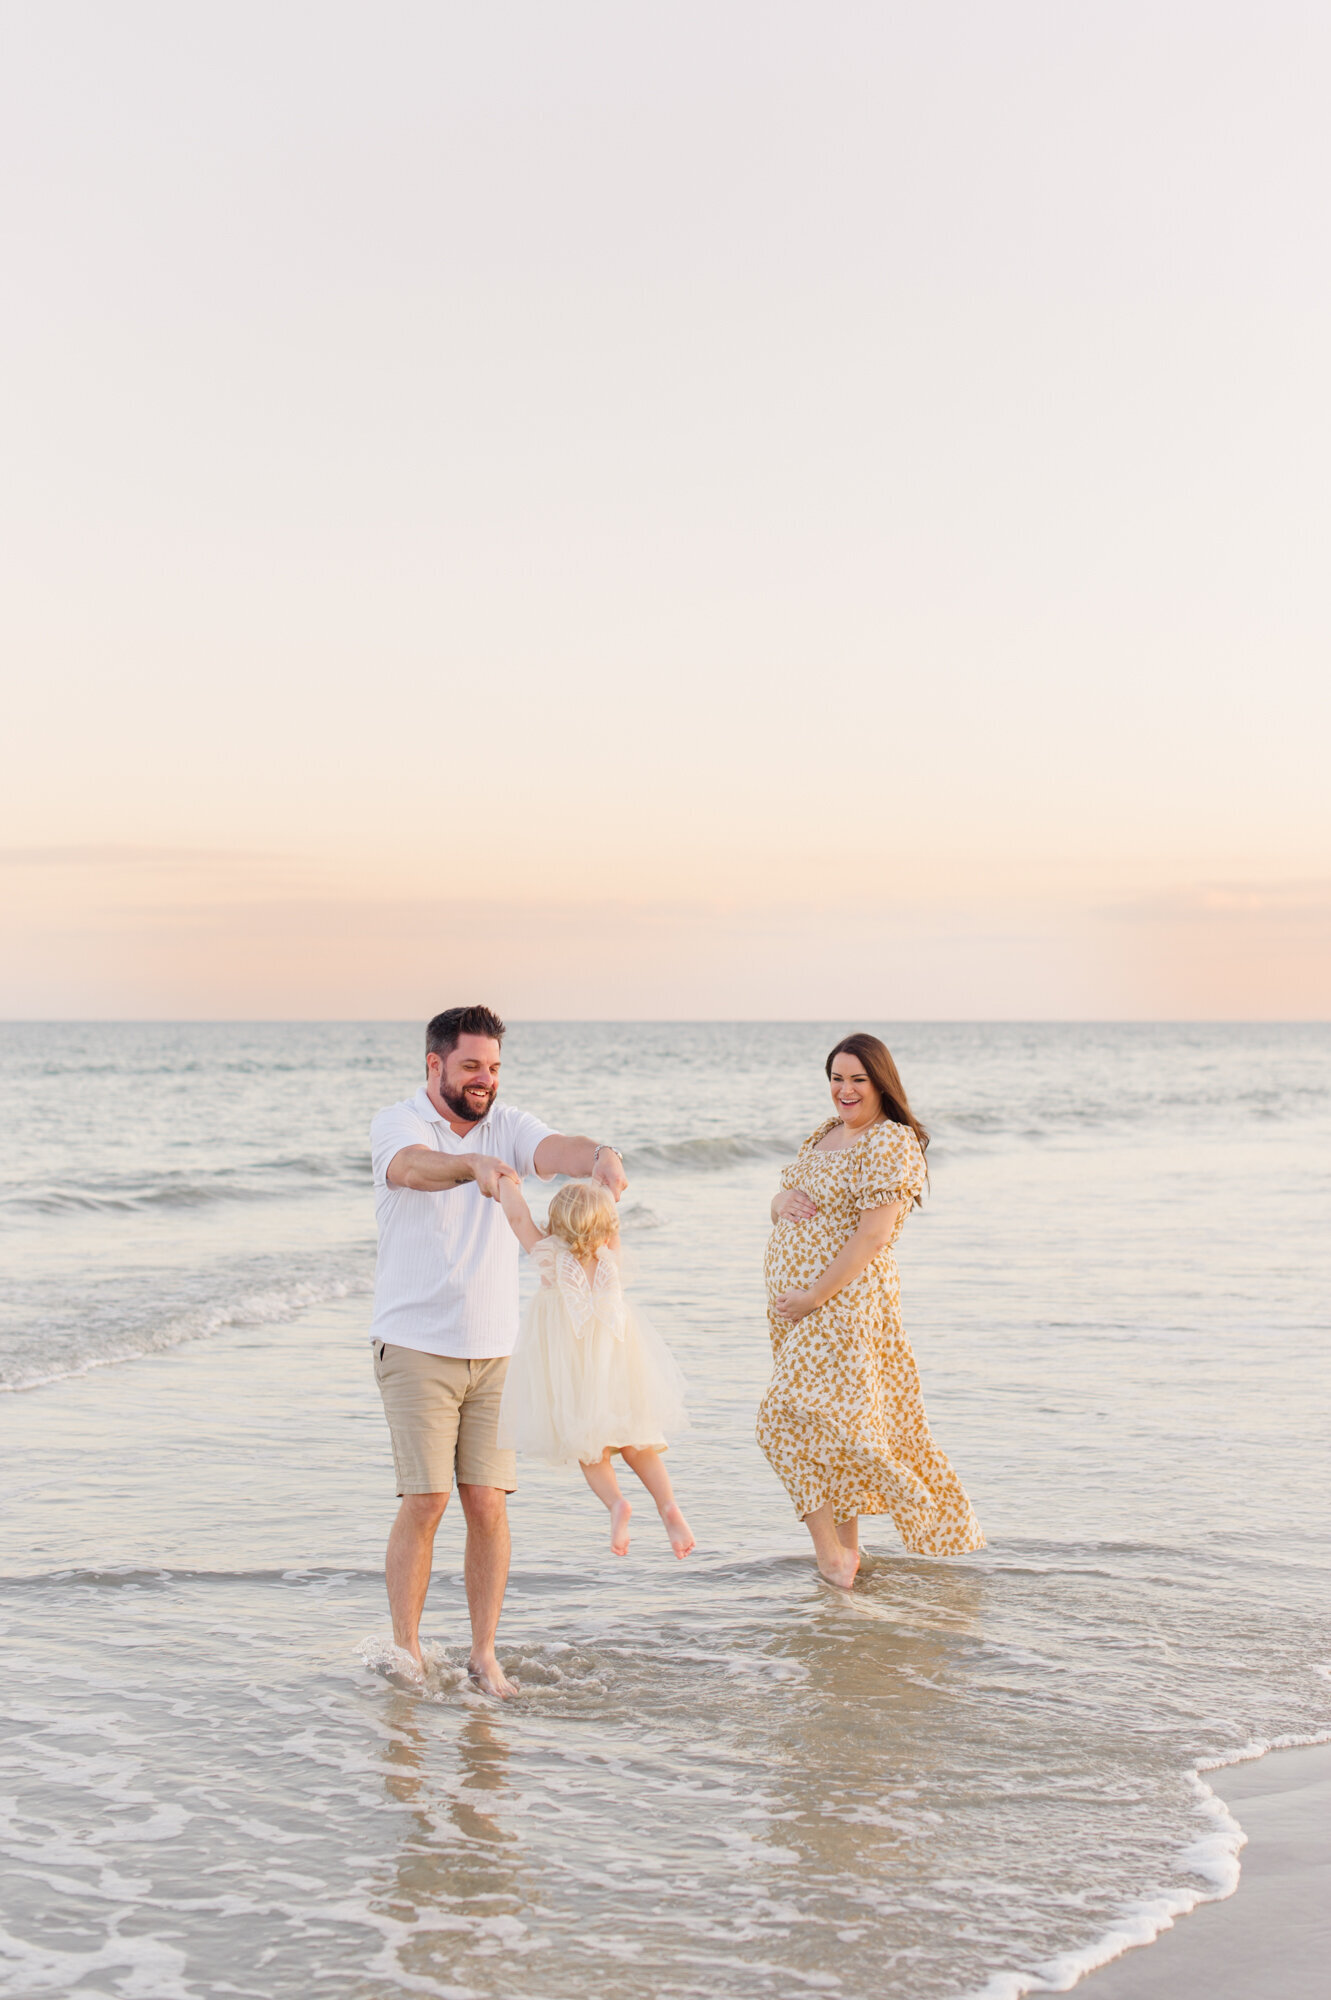 Parents playing near the shoreline for their maternity photo session with their young daughter